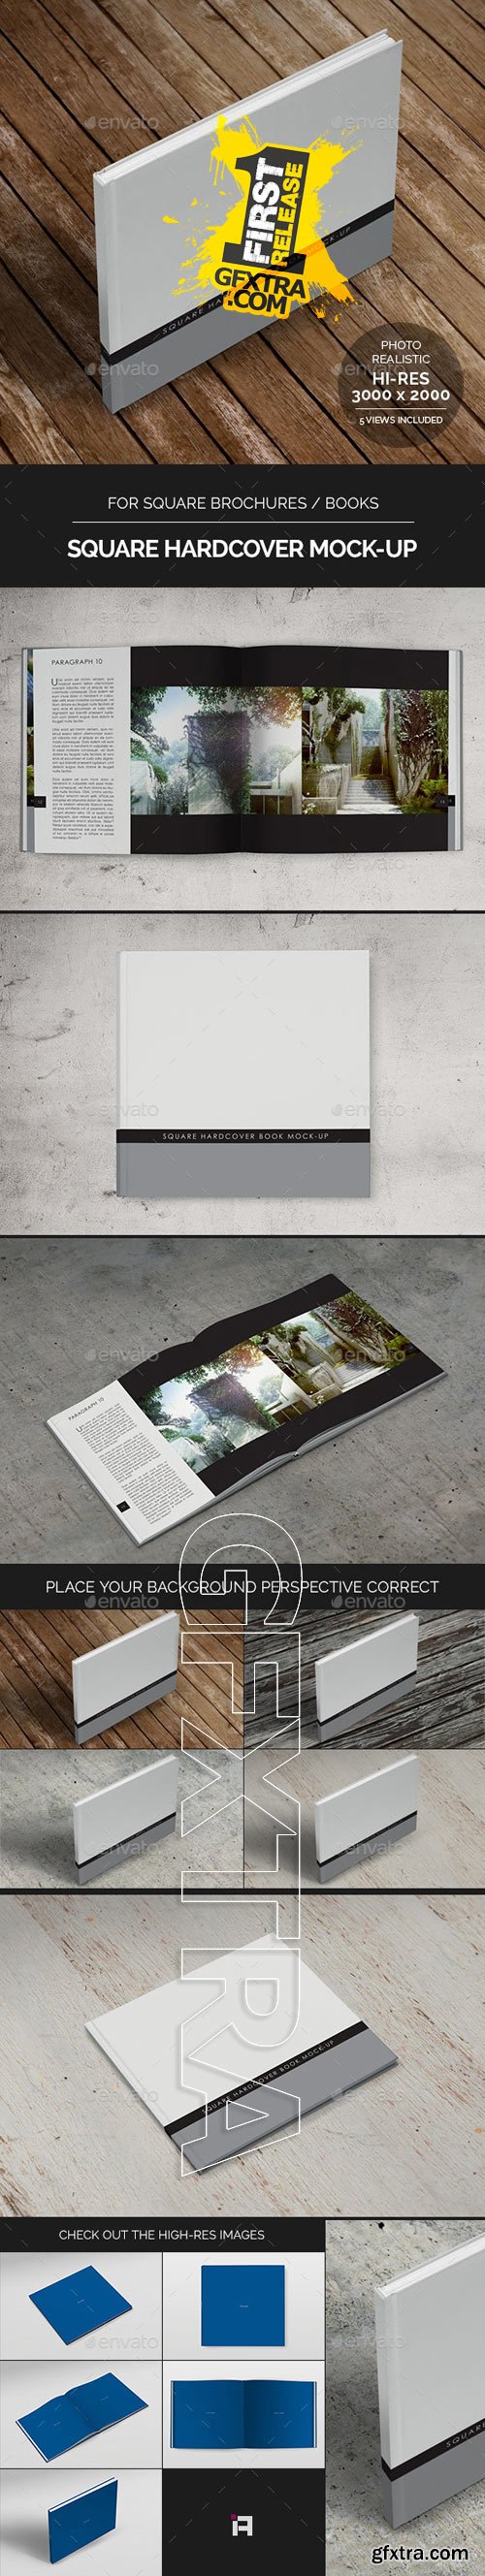 Graphicriver - Square Hardcover Book & Brochure Mock-Up 10442798